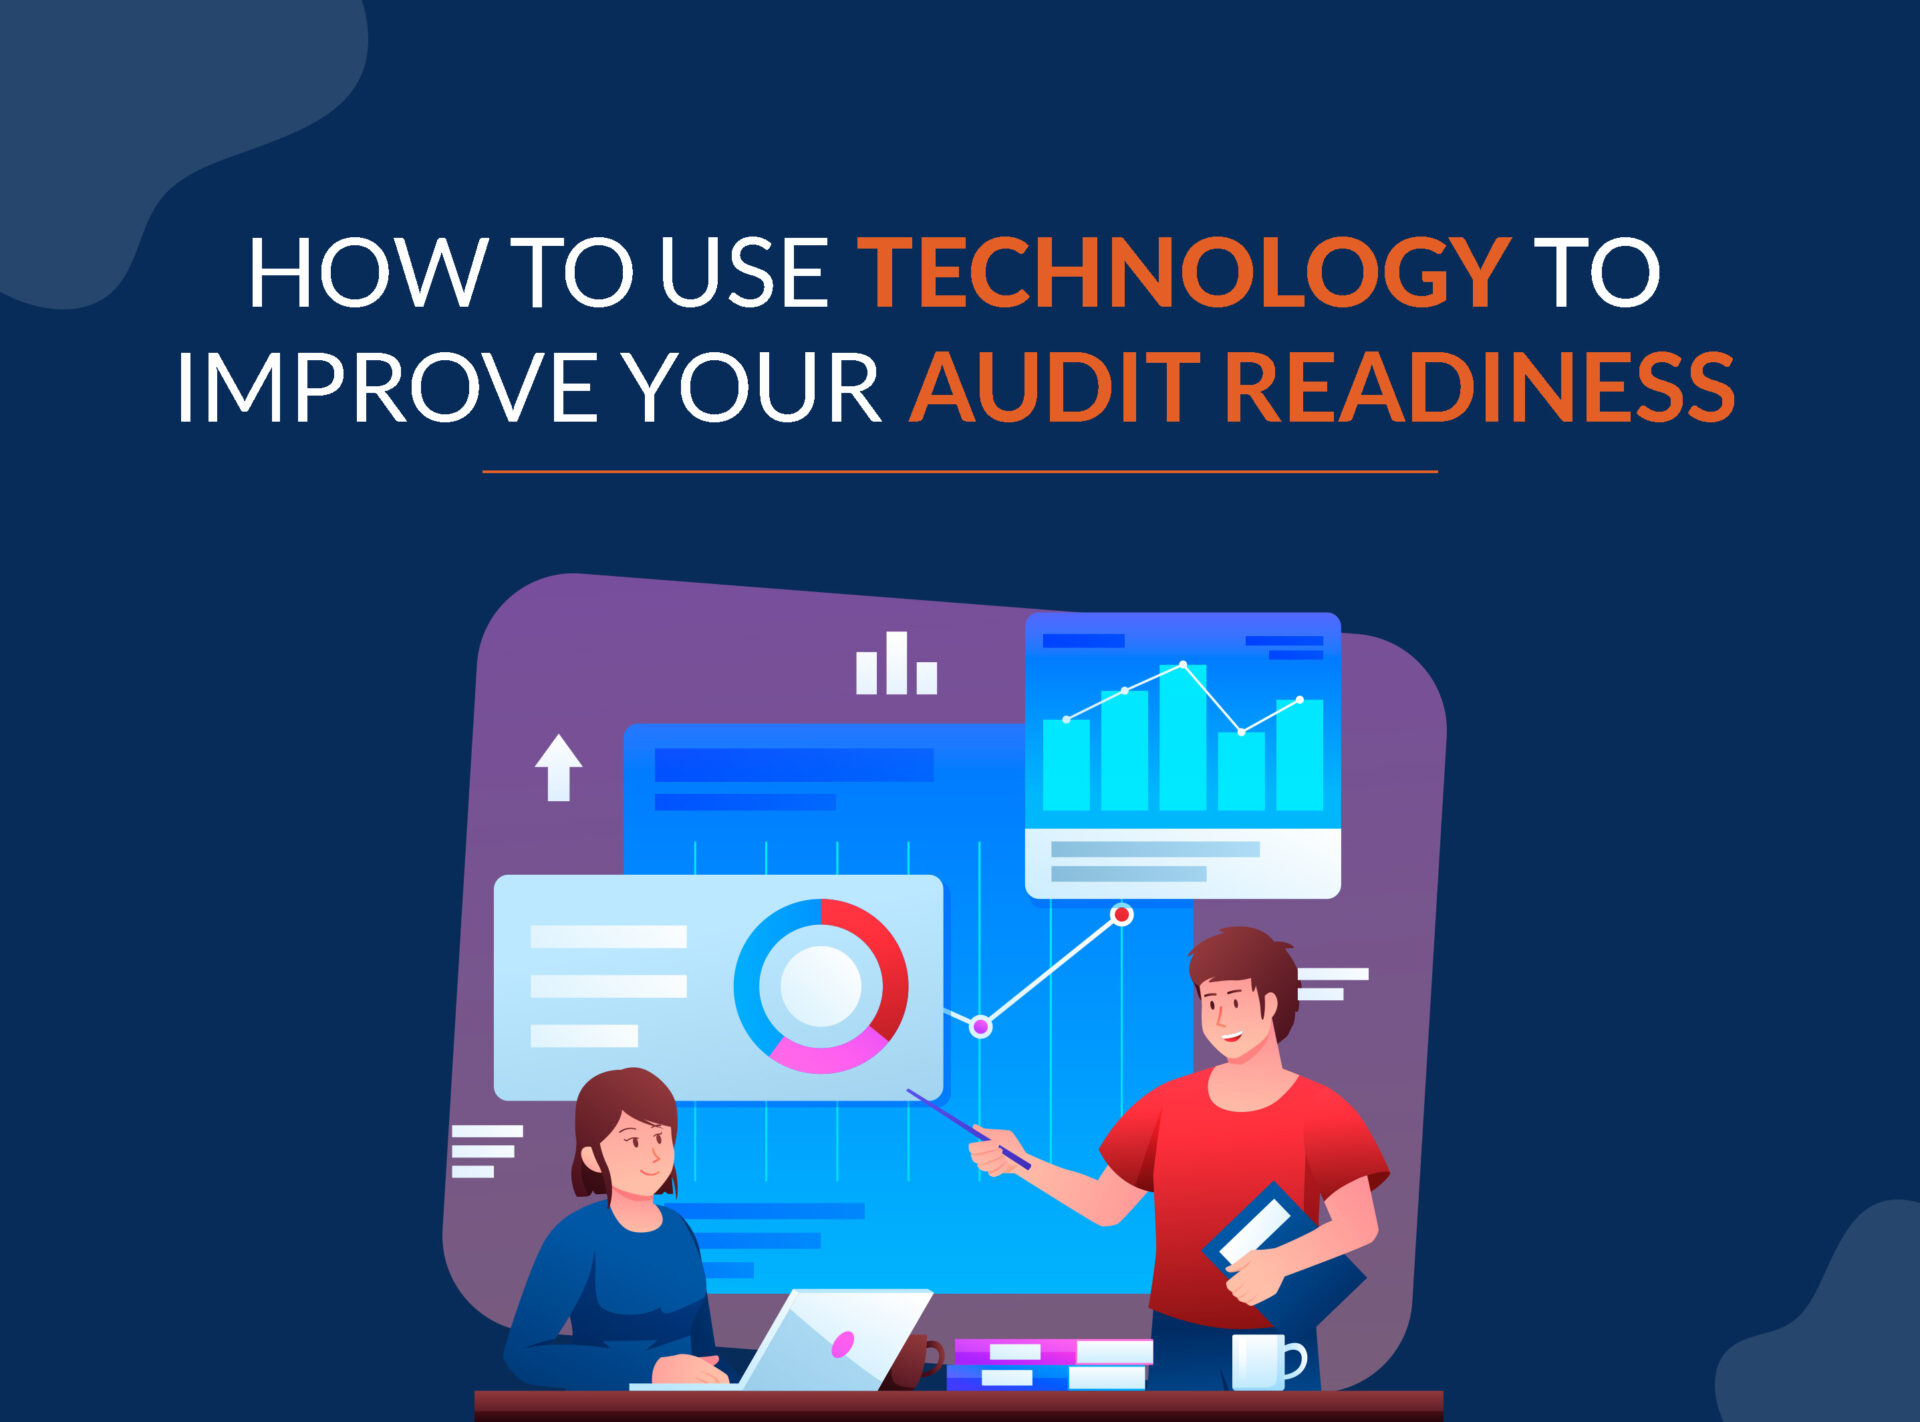 How to Use Technology to Improve Your Audit Readiness